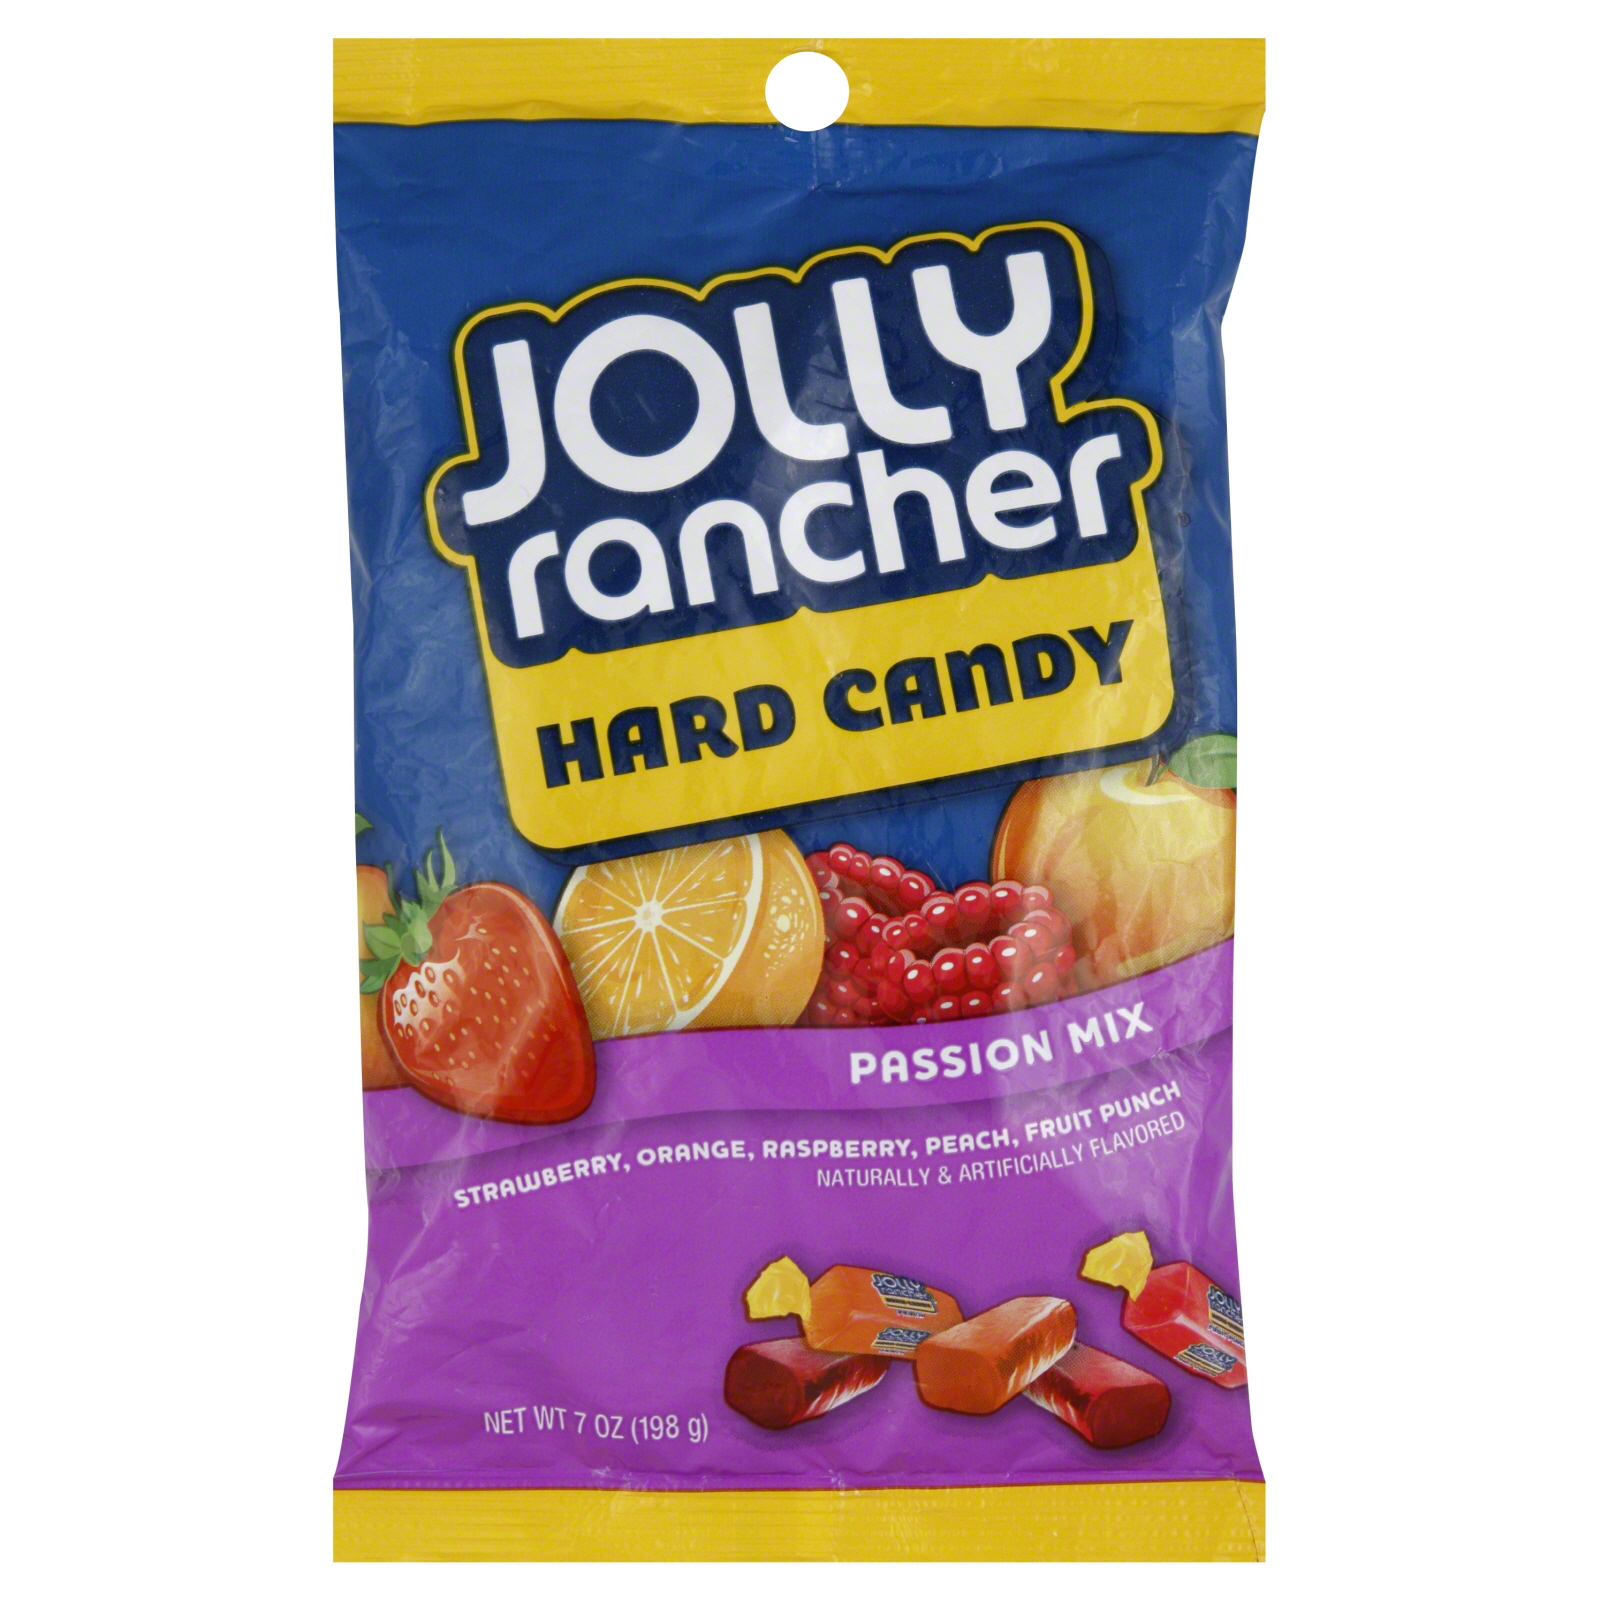 Jolly Rancher Hard Candy, Passion Mix, 7 oz (198 g)